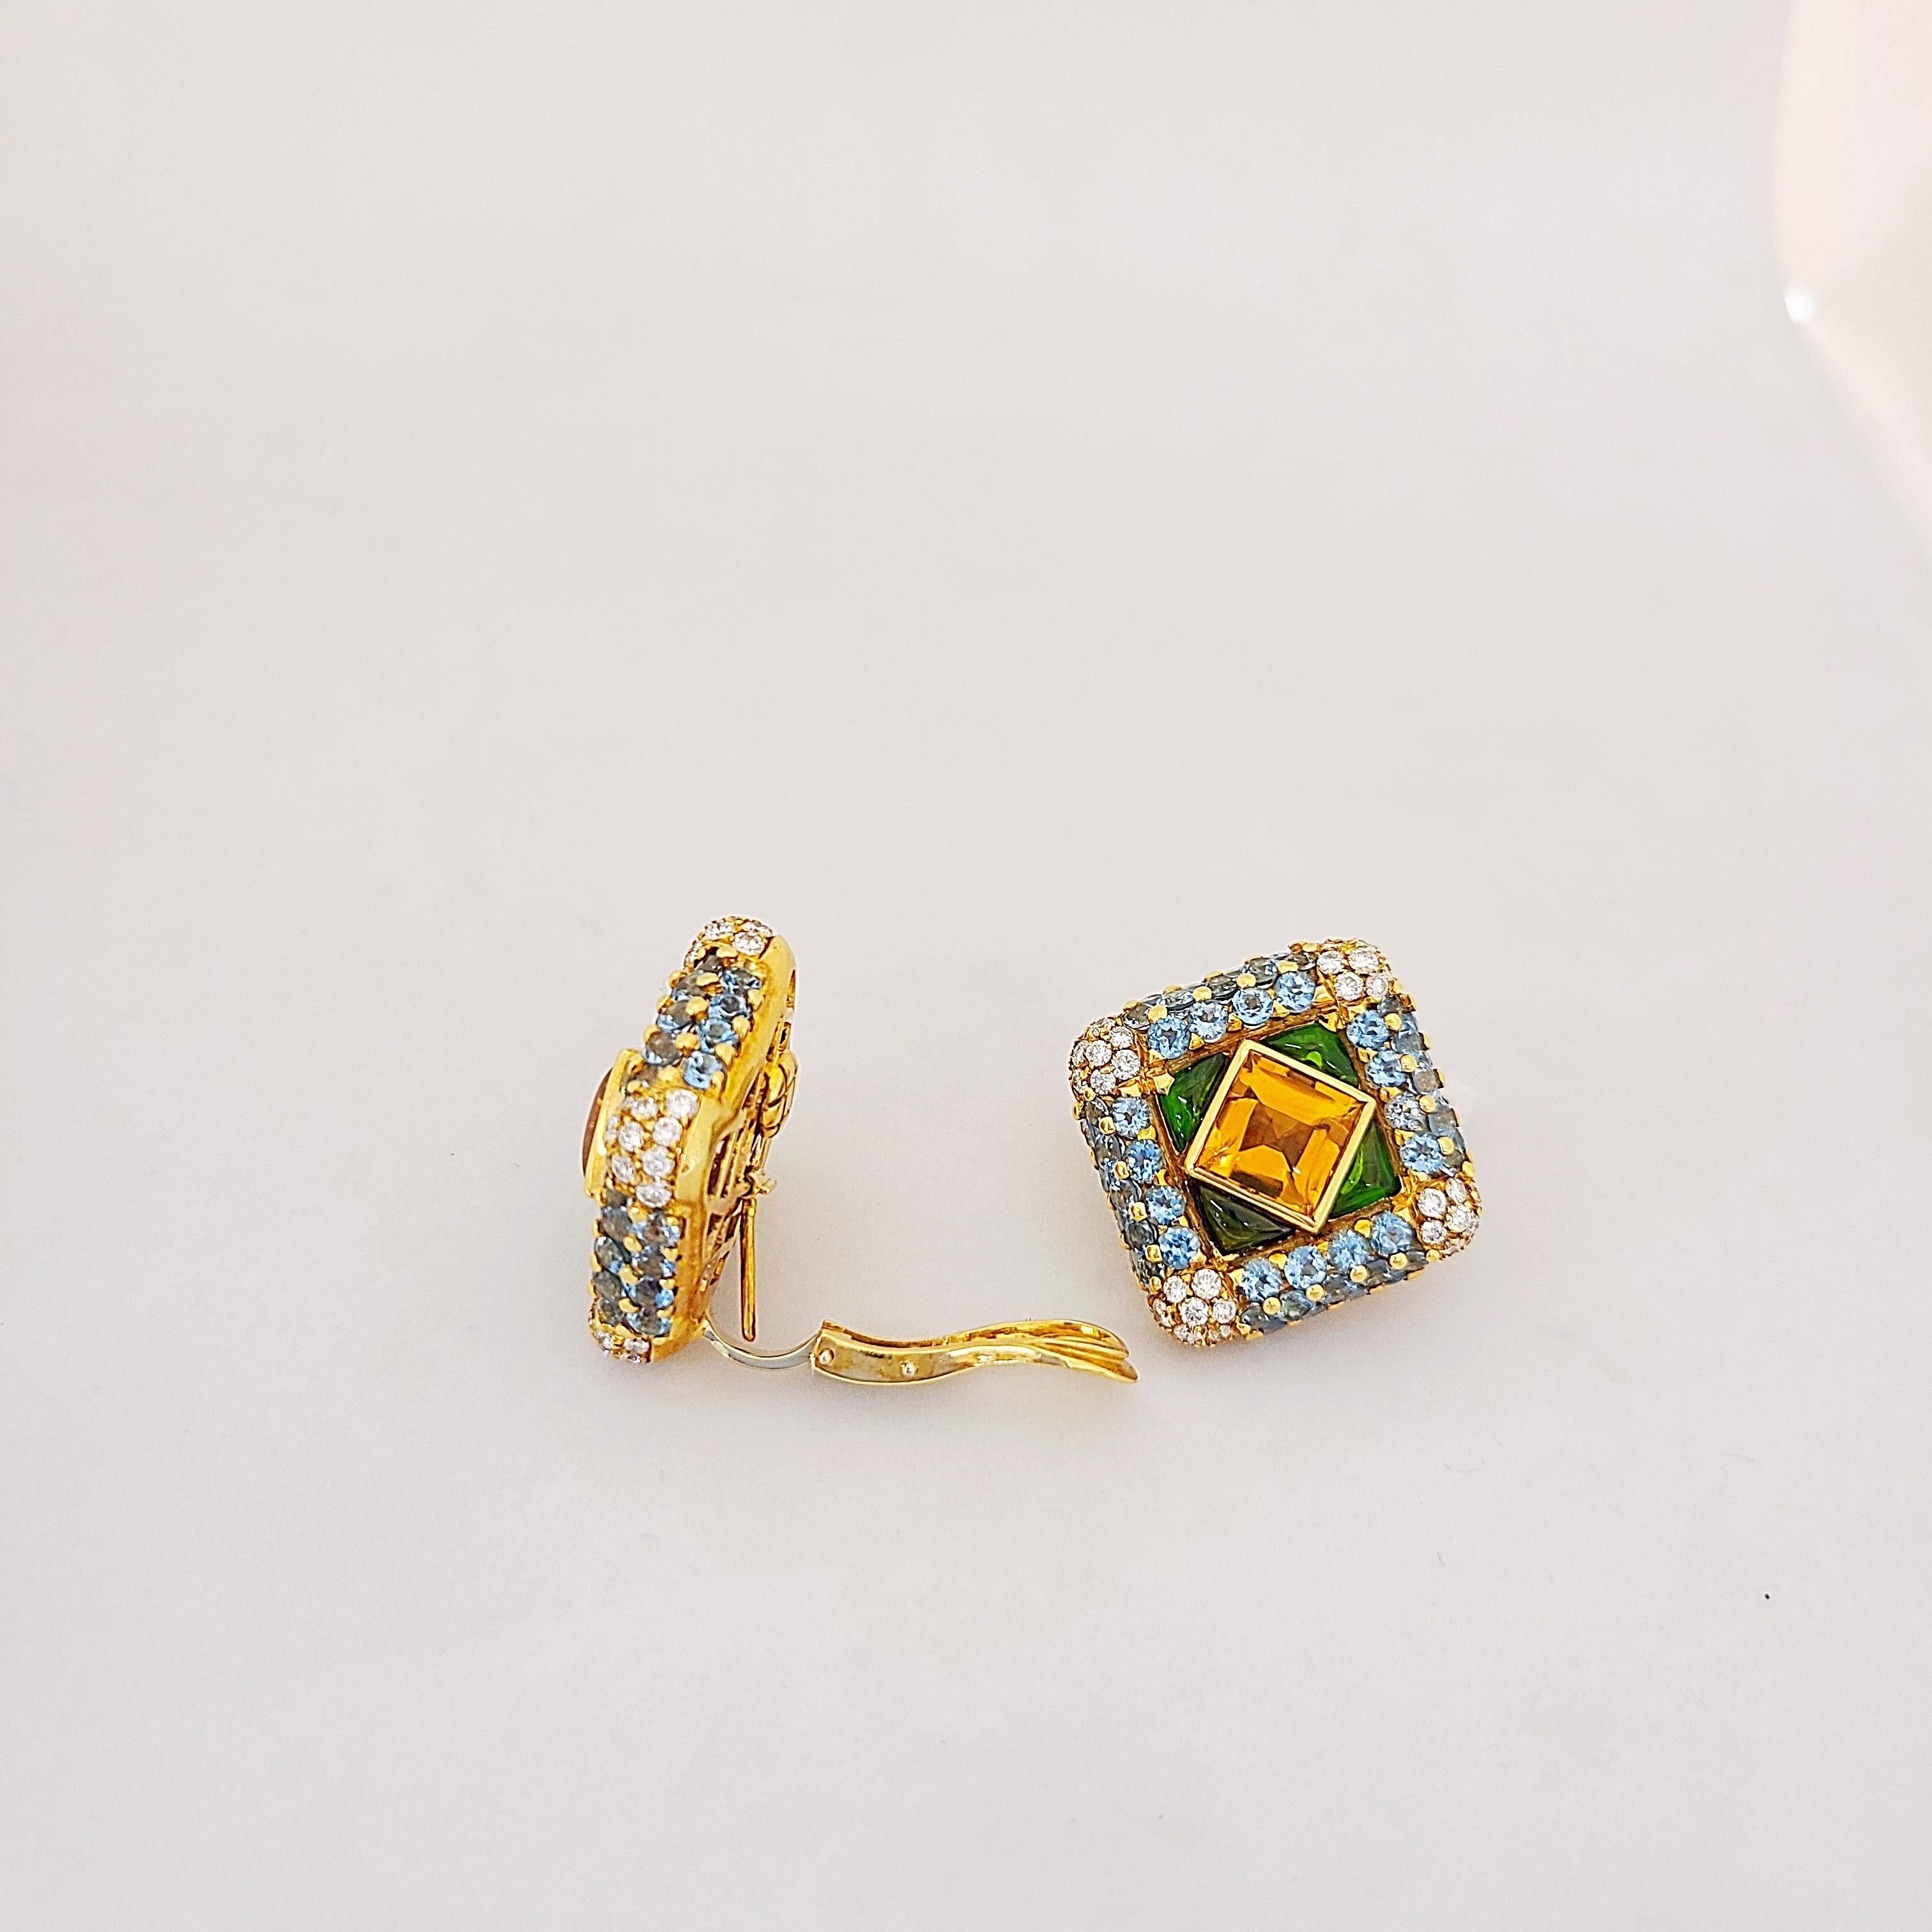 G. verdi of Italy, is known for their outstanding craftsmanship and extraordinary use of color. These earrings center 2.50Ct. Cabochon Citrines, surrounded by Cabochon Tsavorites and round brilliant cut Blue topaz. Semi precious weight totals